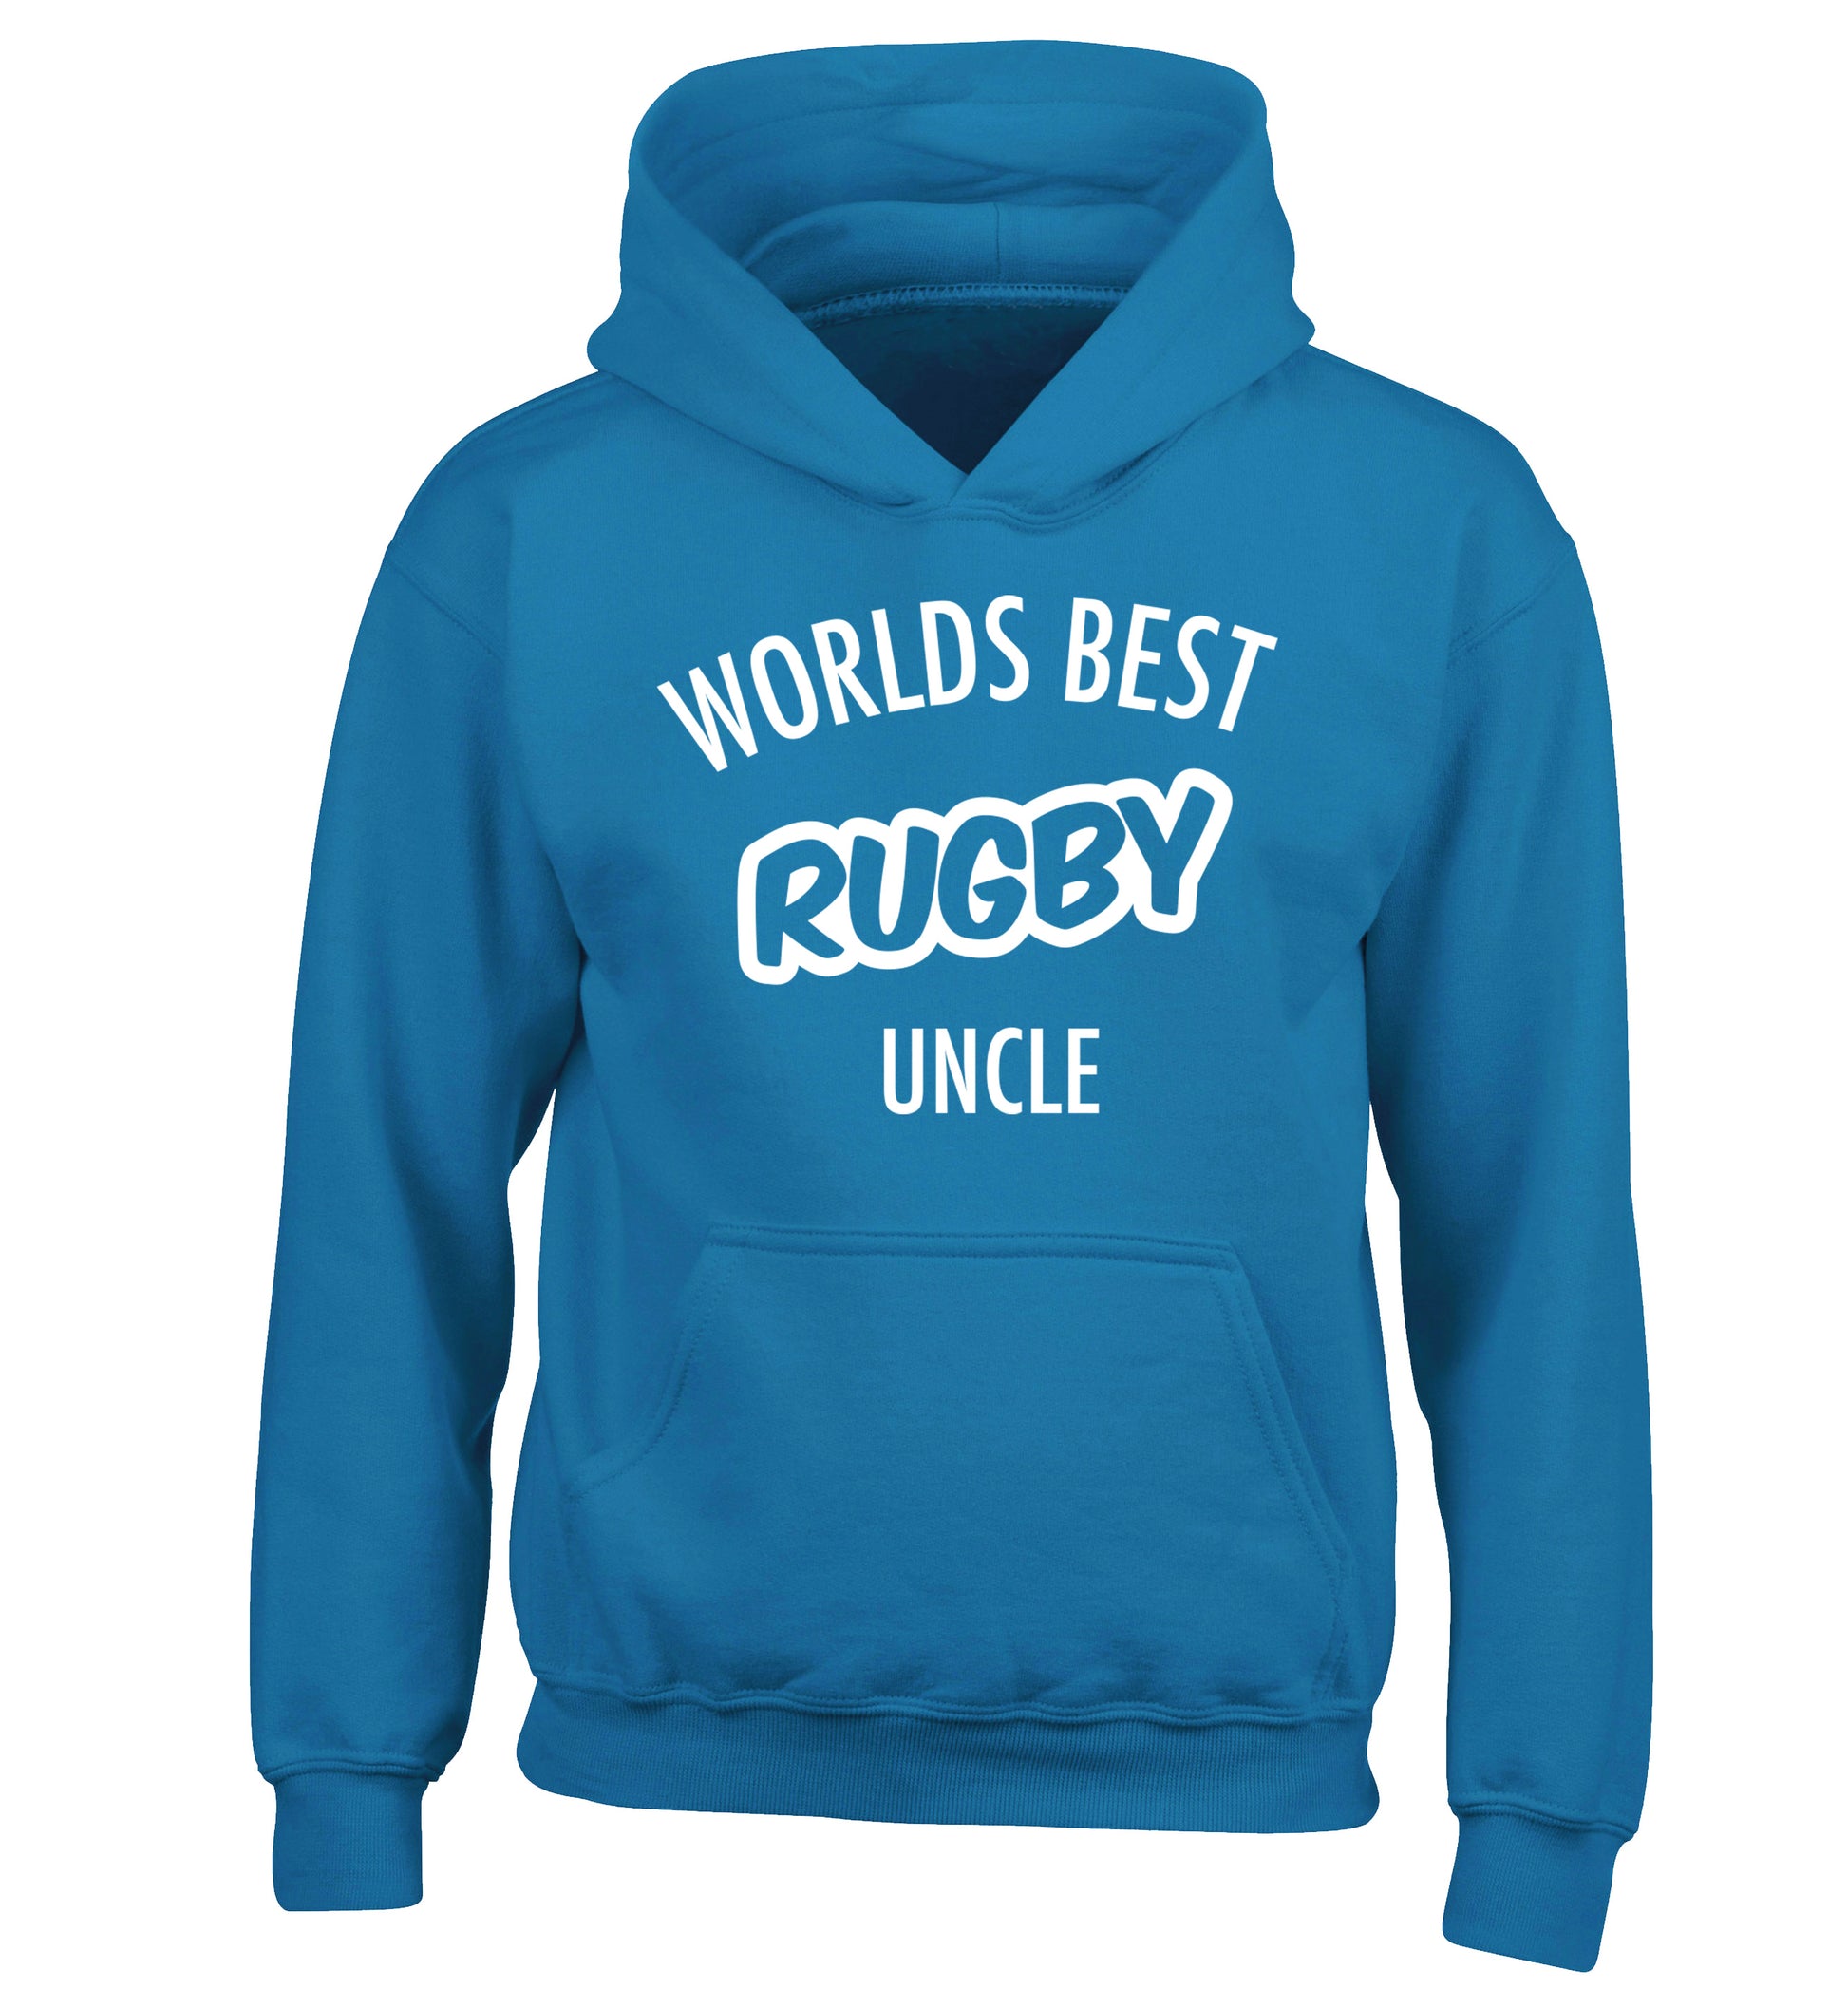 Worlds best rugby uncle children's blue hoodie 12-13 Years